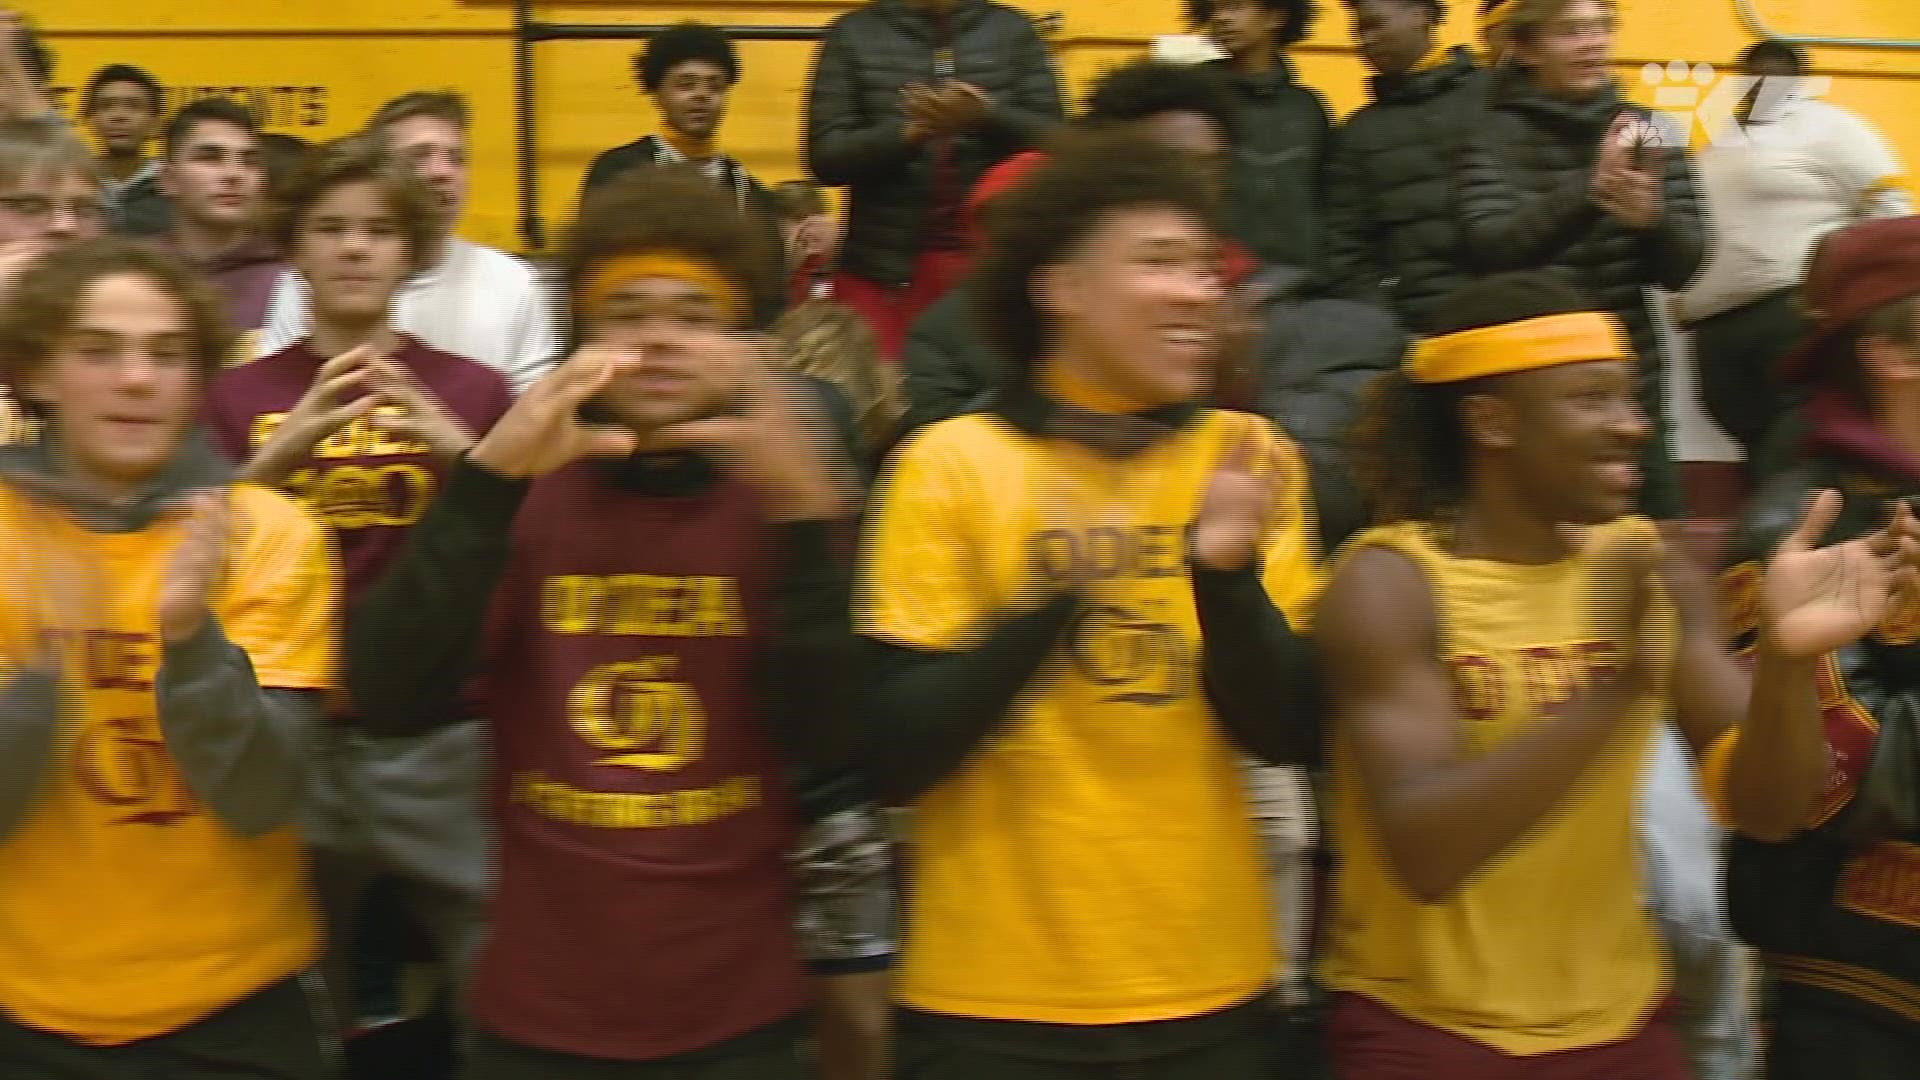 Opening the season with highlights of O'Dea's 78-53 win over Timberline